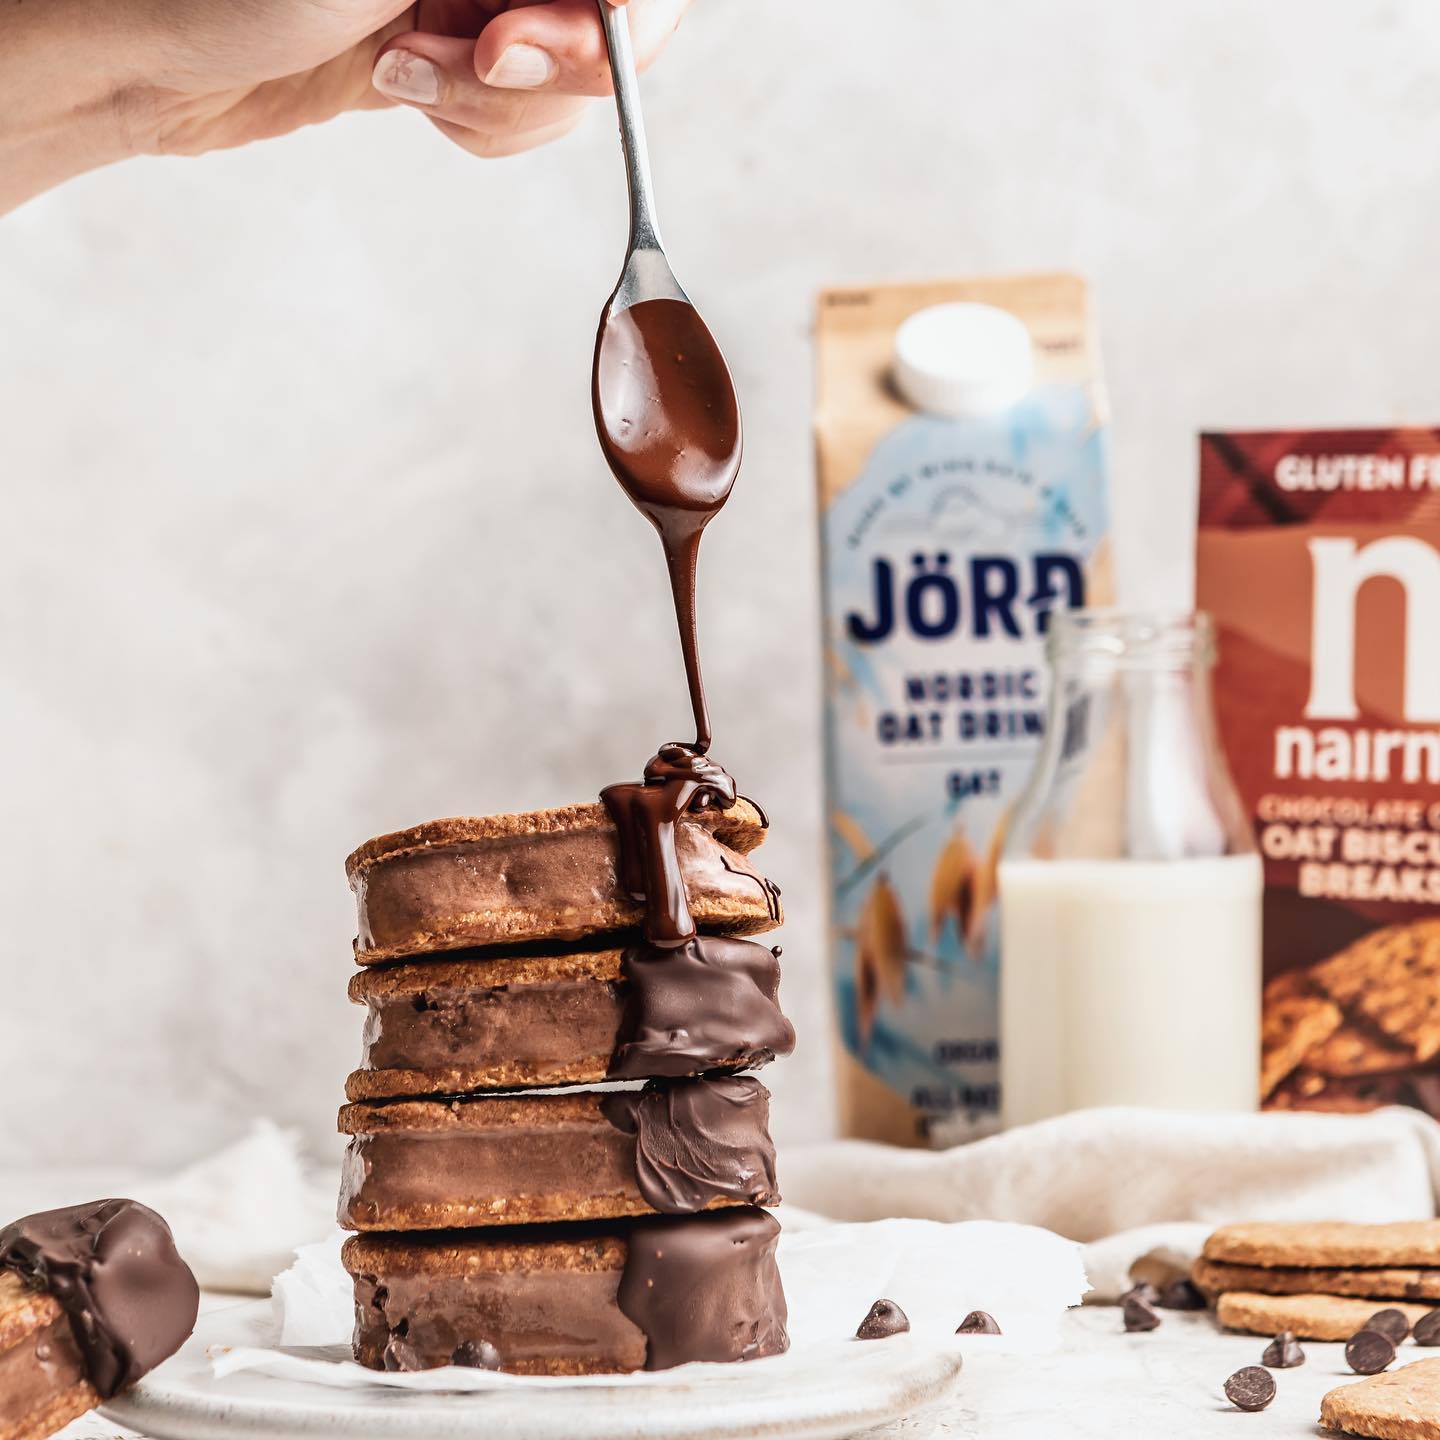 Vegan Chocolate Icecream Sandwiches//
I've teamed up with @morrisons to create this delicious and super easy recipe for you to try this weekend! Using @jordunitedkingdom organic oat drink to create a creamy chocolate ice cream, then sandwiched between two @nairnsoatcakes chocolate chip biscuit breaks and finally, dipped in chocolate 😍. Hit SAVE to give this recipe a try and head to your local Morrisons where you will find the oat milk and biscuit breaks on offer currently too! #AD

Ready in 20 minutes plus 4-6 hours freeze time

INGREDIENTS

1 x 400ml full fat coconut milk
80g light muscovado sugar
100ml Jord Nordic oat drink
30g coconut oil
2 tsp vanilla extract
1 tbsp cocoa powder
1 x 160g pack Nairn’s oat biscuit breaks, chocolate chip
(OPTIONAL) 100g Morrison’s free from chocolate bar, for dipping

METHOD

1. Add the coconut milk, sugar and milk to saucepan and place on a low heat, stirring until sugar has dissolved. Increase the heat to bring the mixture to a gentle simmer. Simmer for 5 minutes, whisking occasionally.
2. Remove from the heat, whisk through the coconut oil, vanilla extract and cocoa powder until fully combined.
3. Pour into suitable container and chill for 2 hours.
4. If using an ice cream maker, pour the chilled mix in and churn for 20-30 minutes until it turns into a soft scoop ice cream, then make the ice cream sandwiches.
5. If you don’t have an ice-cream maker, once the mixture is chilled, place in the freezer for 3-4 hours. Leave to stand for 10-15 minutes to soften slightly before scooping.
6. Take 2 oat biscuit breaks, scoop some ice cream on top of one biscuit and place another biscuit on top, repeat with all the biscuits.
7. If using, break the chocolate into pieces and place in a large microwave safe bowl, heat in 10-15 second increments stirring each time, until fully melted. Dip one end of the ice cream sandwich into the chocolate bowl and place onto a serving plate.
8. Serve straightaway or pop back in the freezer until ready to eat.

#morrisons #freefromevent #vegan #icecream #icecreamsandwiches #veganicecream #chocolate